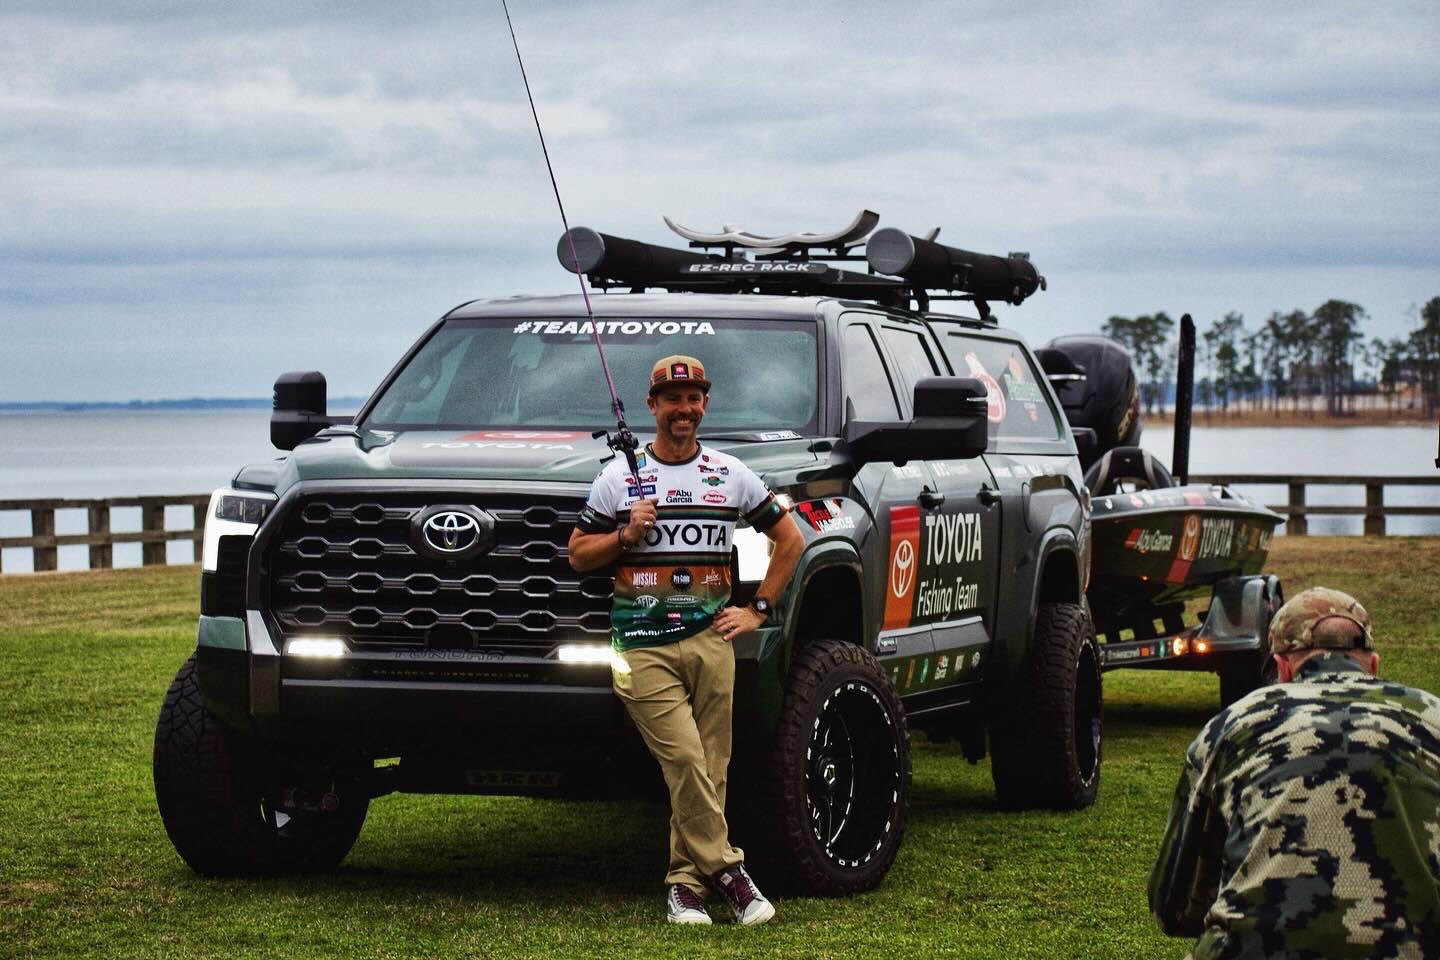 Mike “IKE” Iaconelli on X: I had a great few days down in Texas at Sam  Rayburn shooting some photos and videos for Toyota! Now it's time to get  back to some